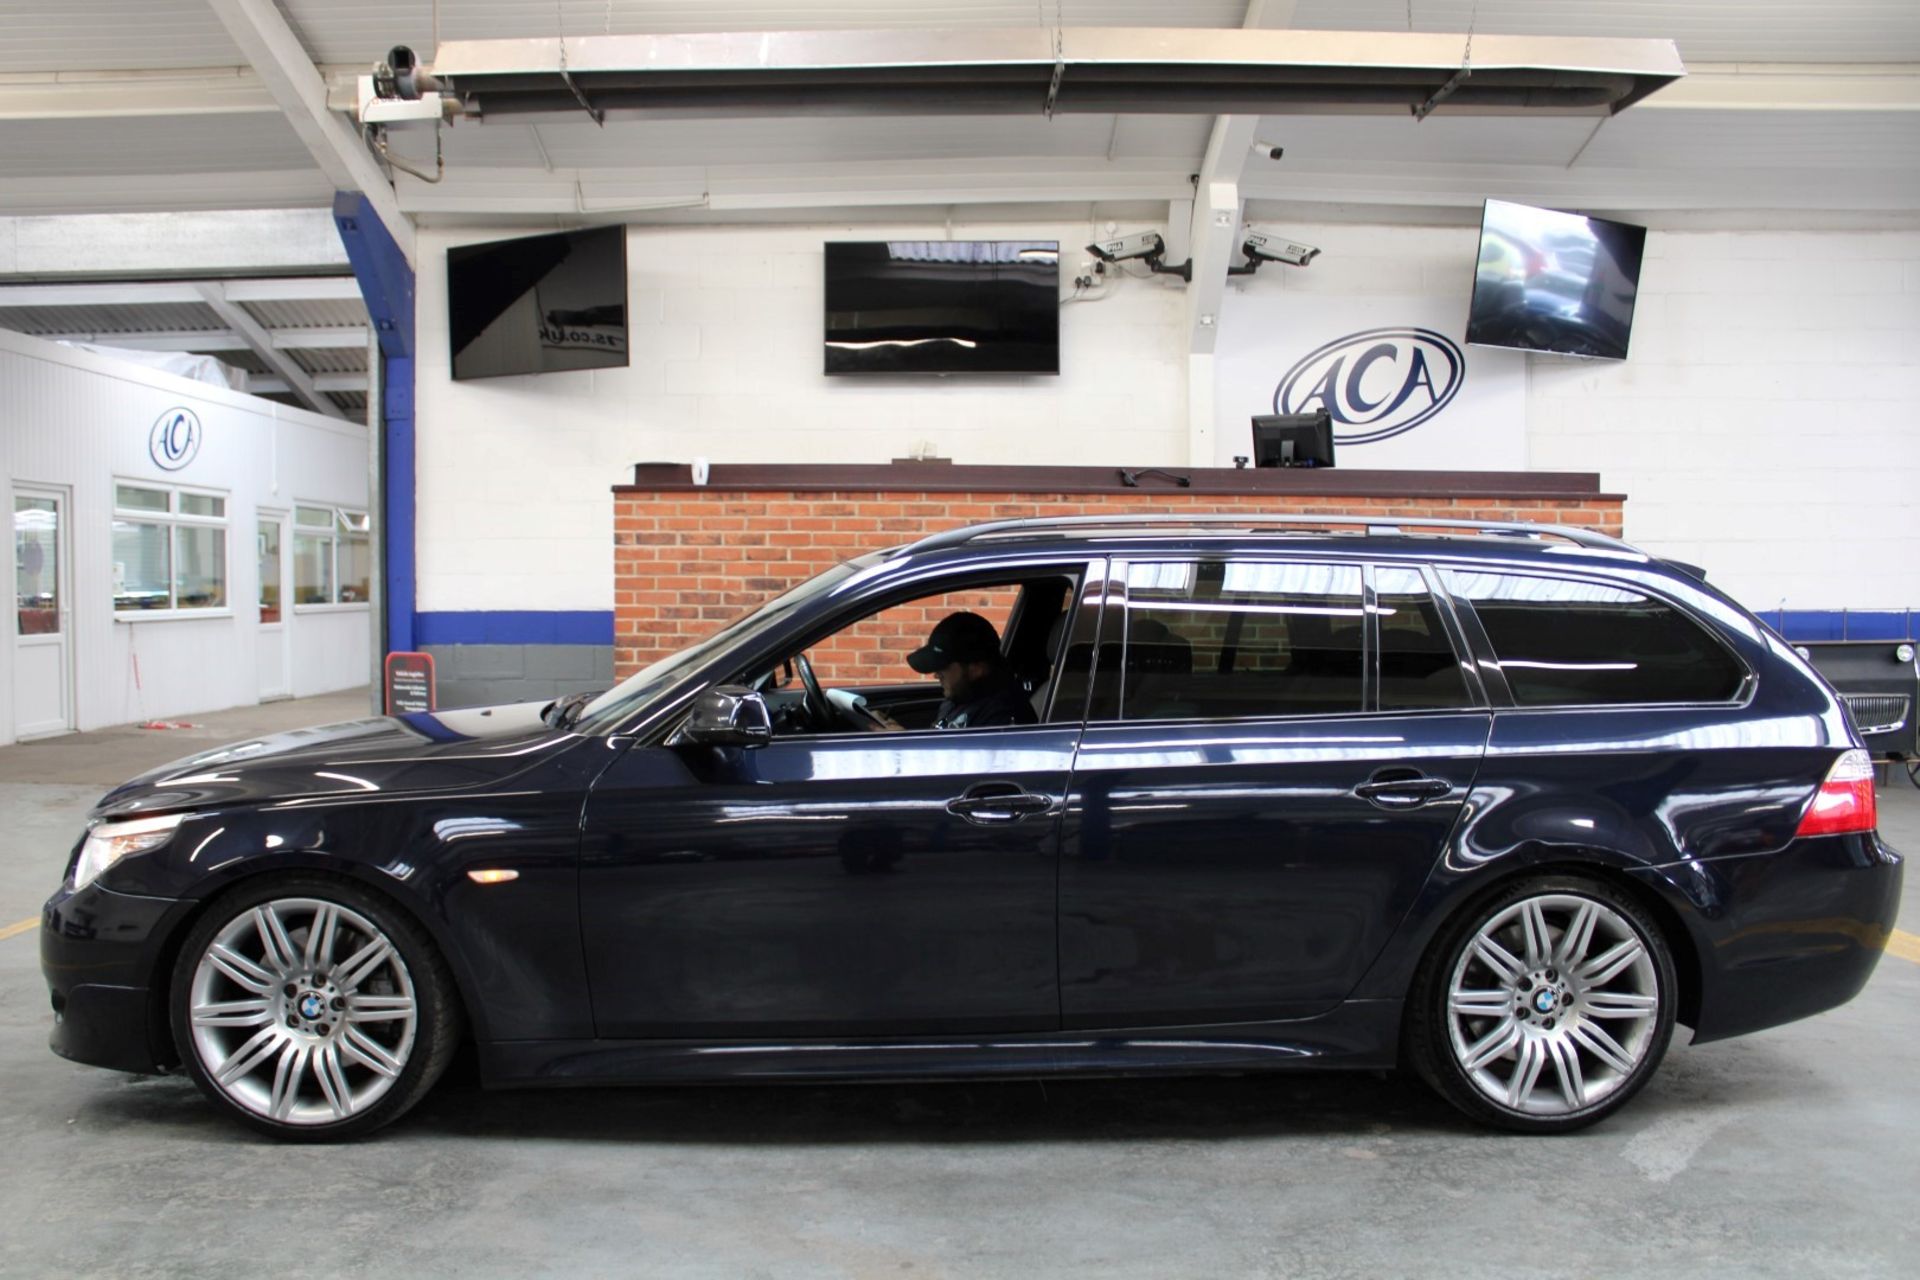 59 09 BMW 535D M Sport Touring - Image 27 of 27